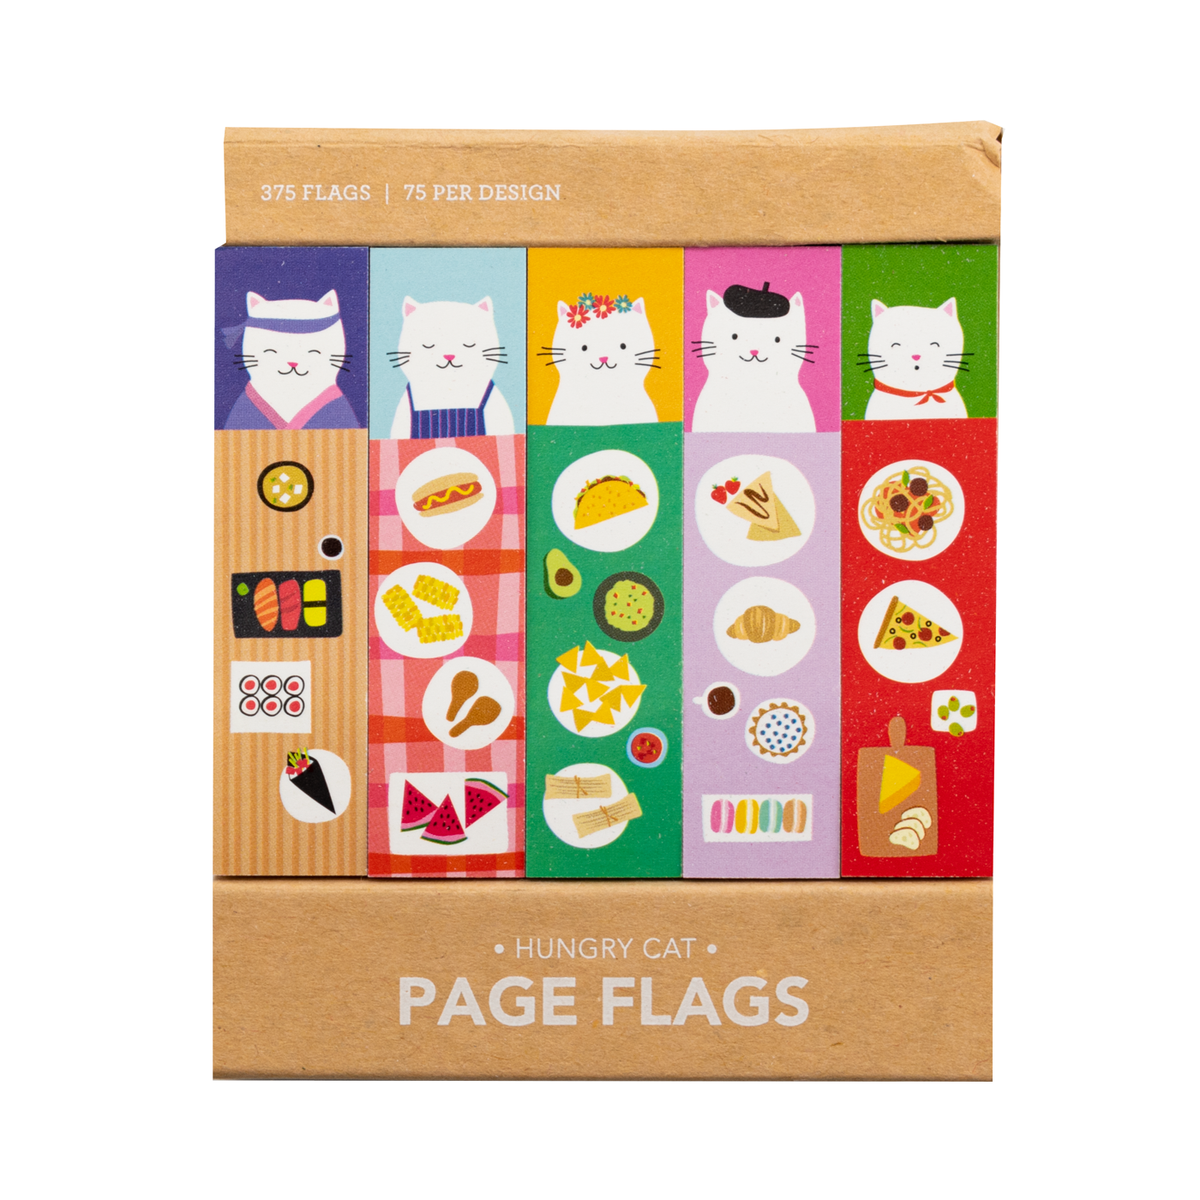 Girl of ALL WORK - Page Flags - Adhesive flags - Hungry Cat